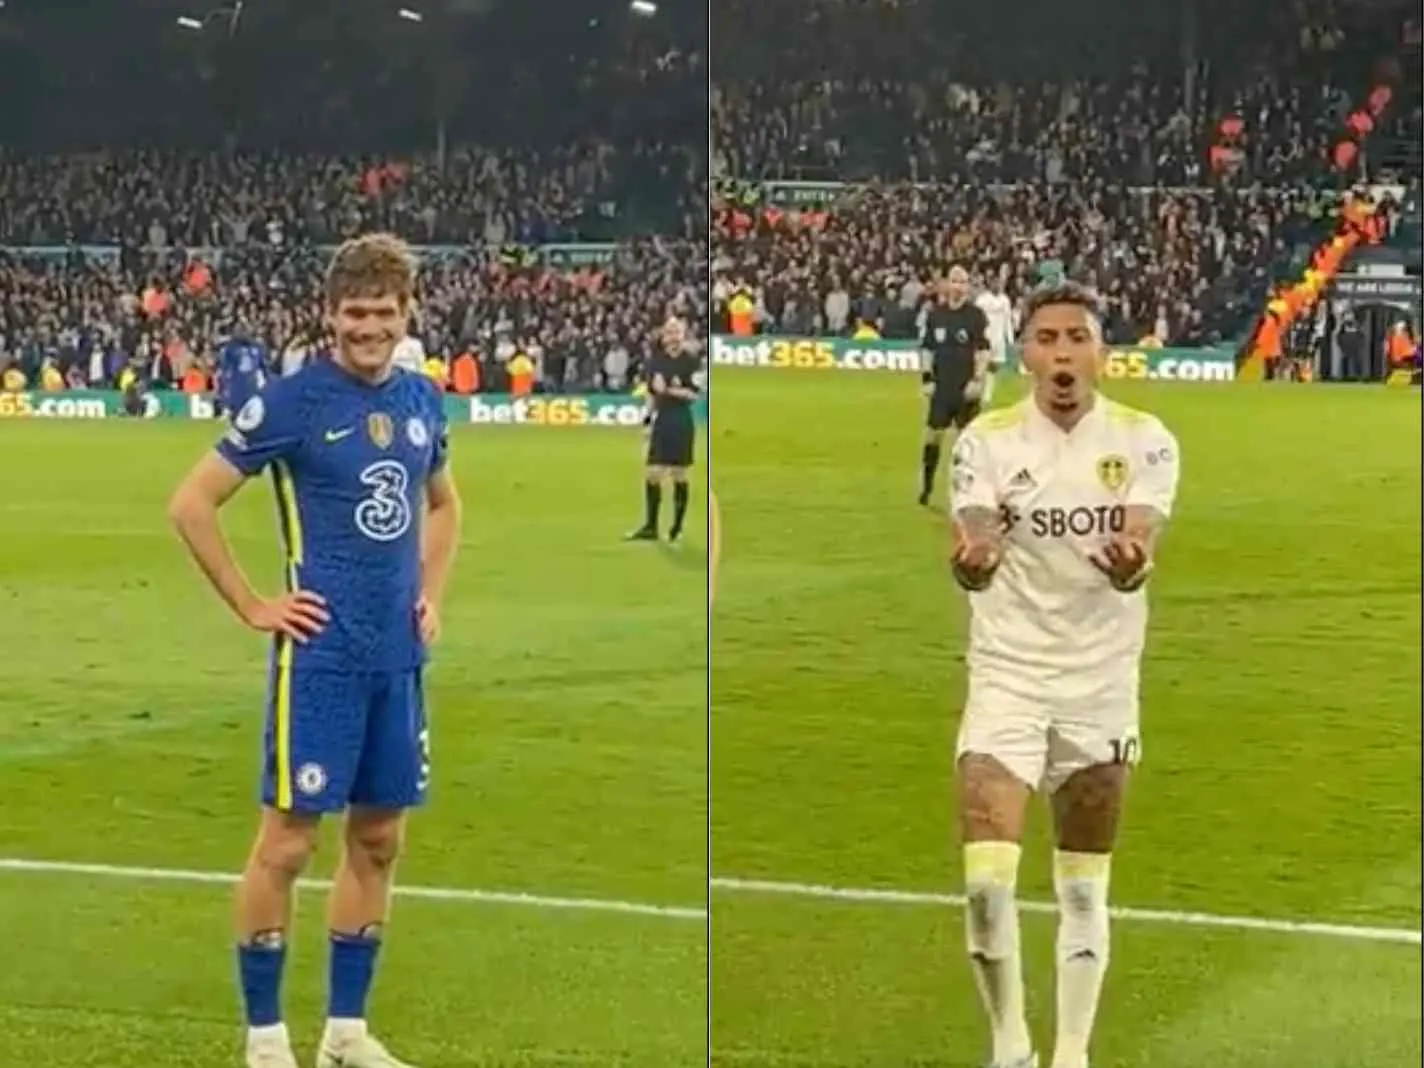 In this image - Marcos Alonso and Raphinha's contrasting reaction as Leeds fan refuses to give the ball back